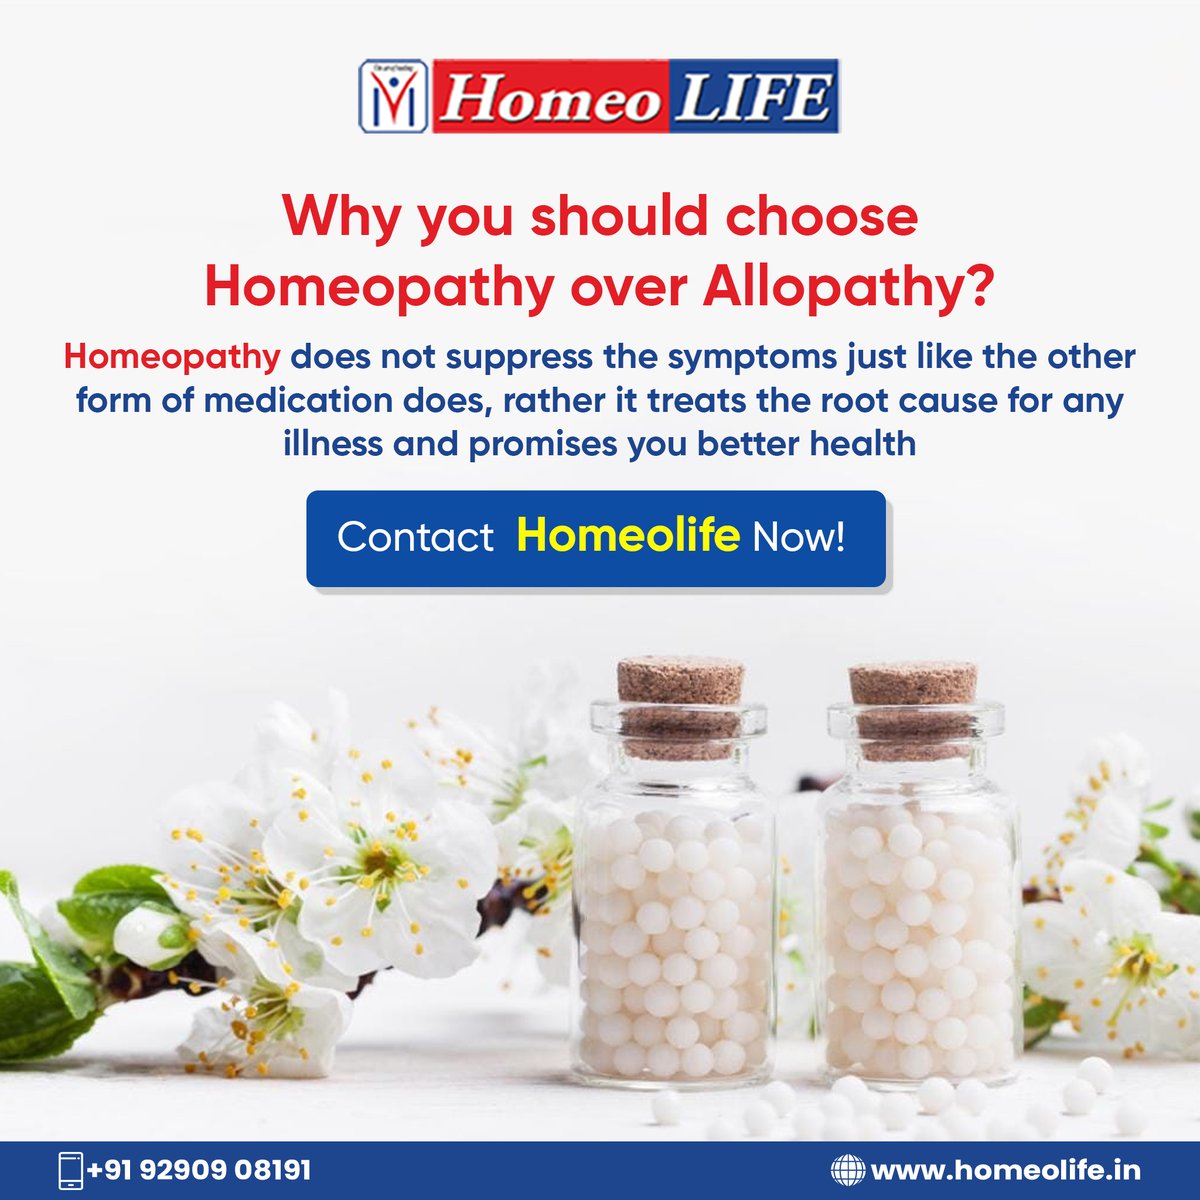 Homeopathy is an effective way of treating a disease. For any queries regarding homeopathic treatment, check the below link:
homeolife.in/about/

#homeo #homeopathy #homeoclinic #homeotreatment #homeopathicdoctor #homeoclinicnearme #homeodoctornearme #homeolife